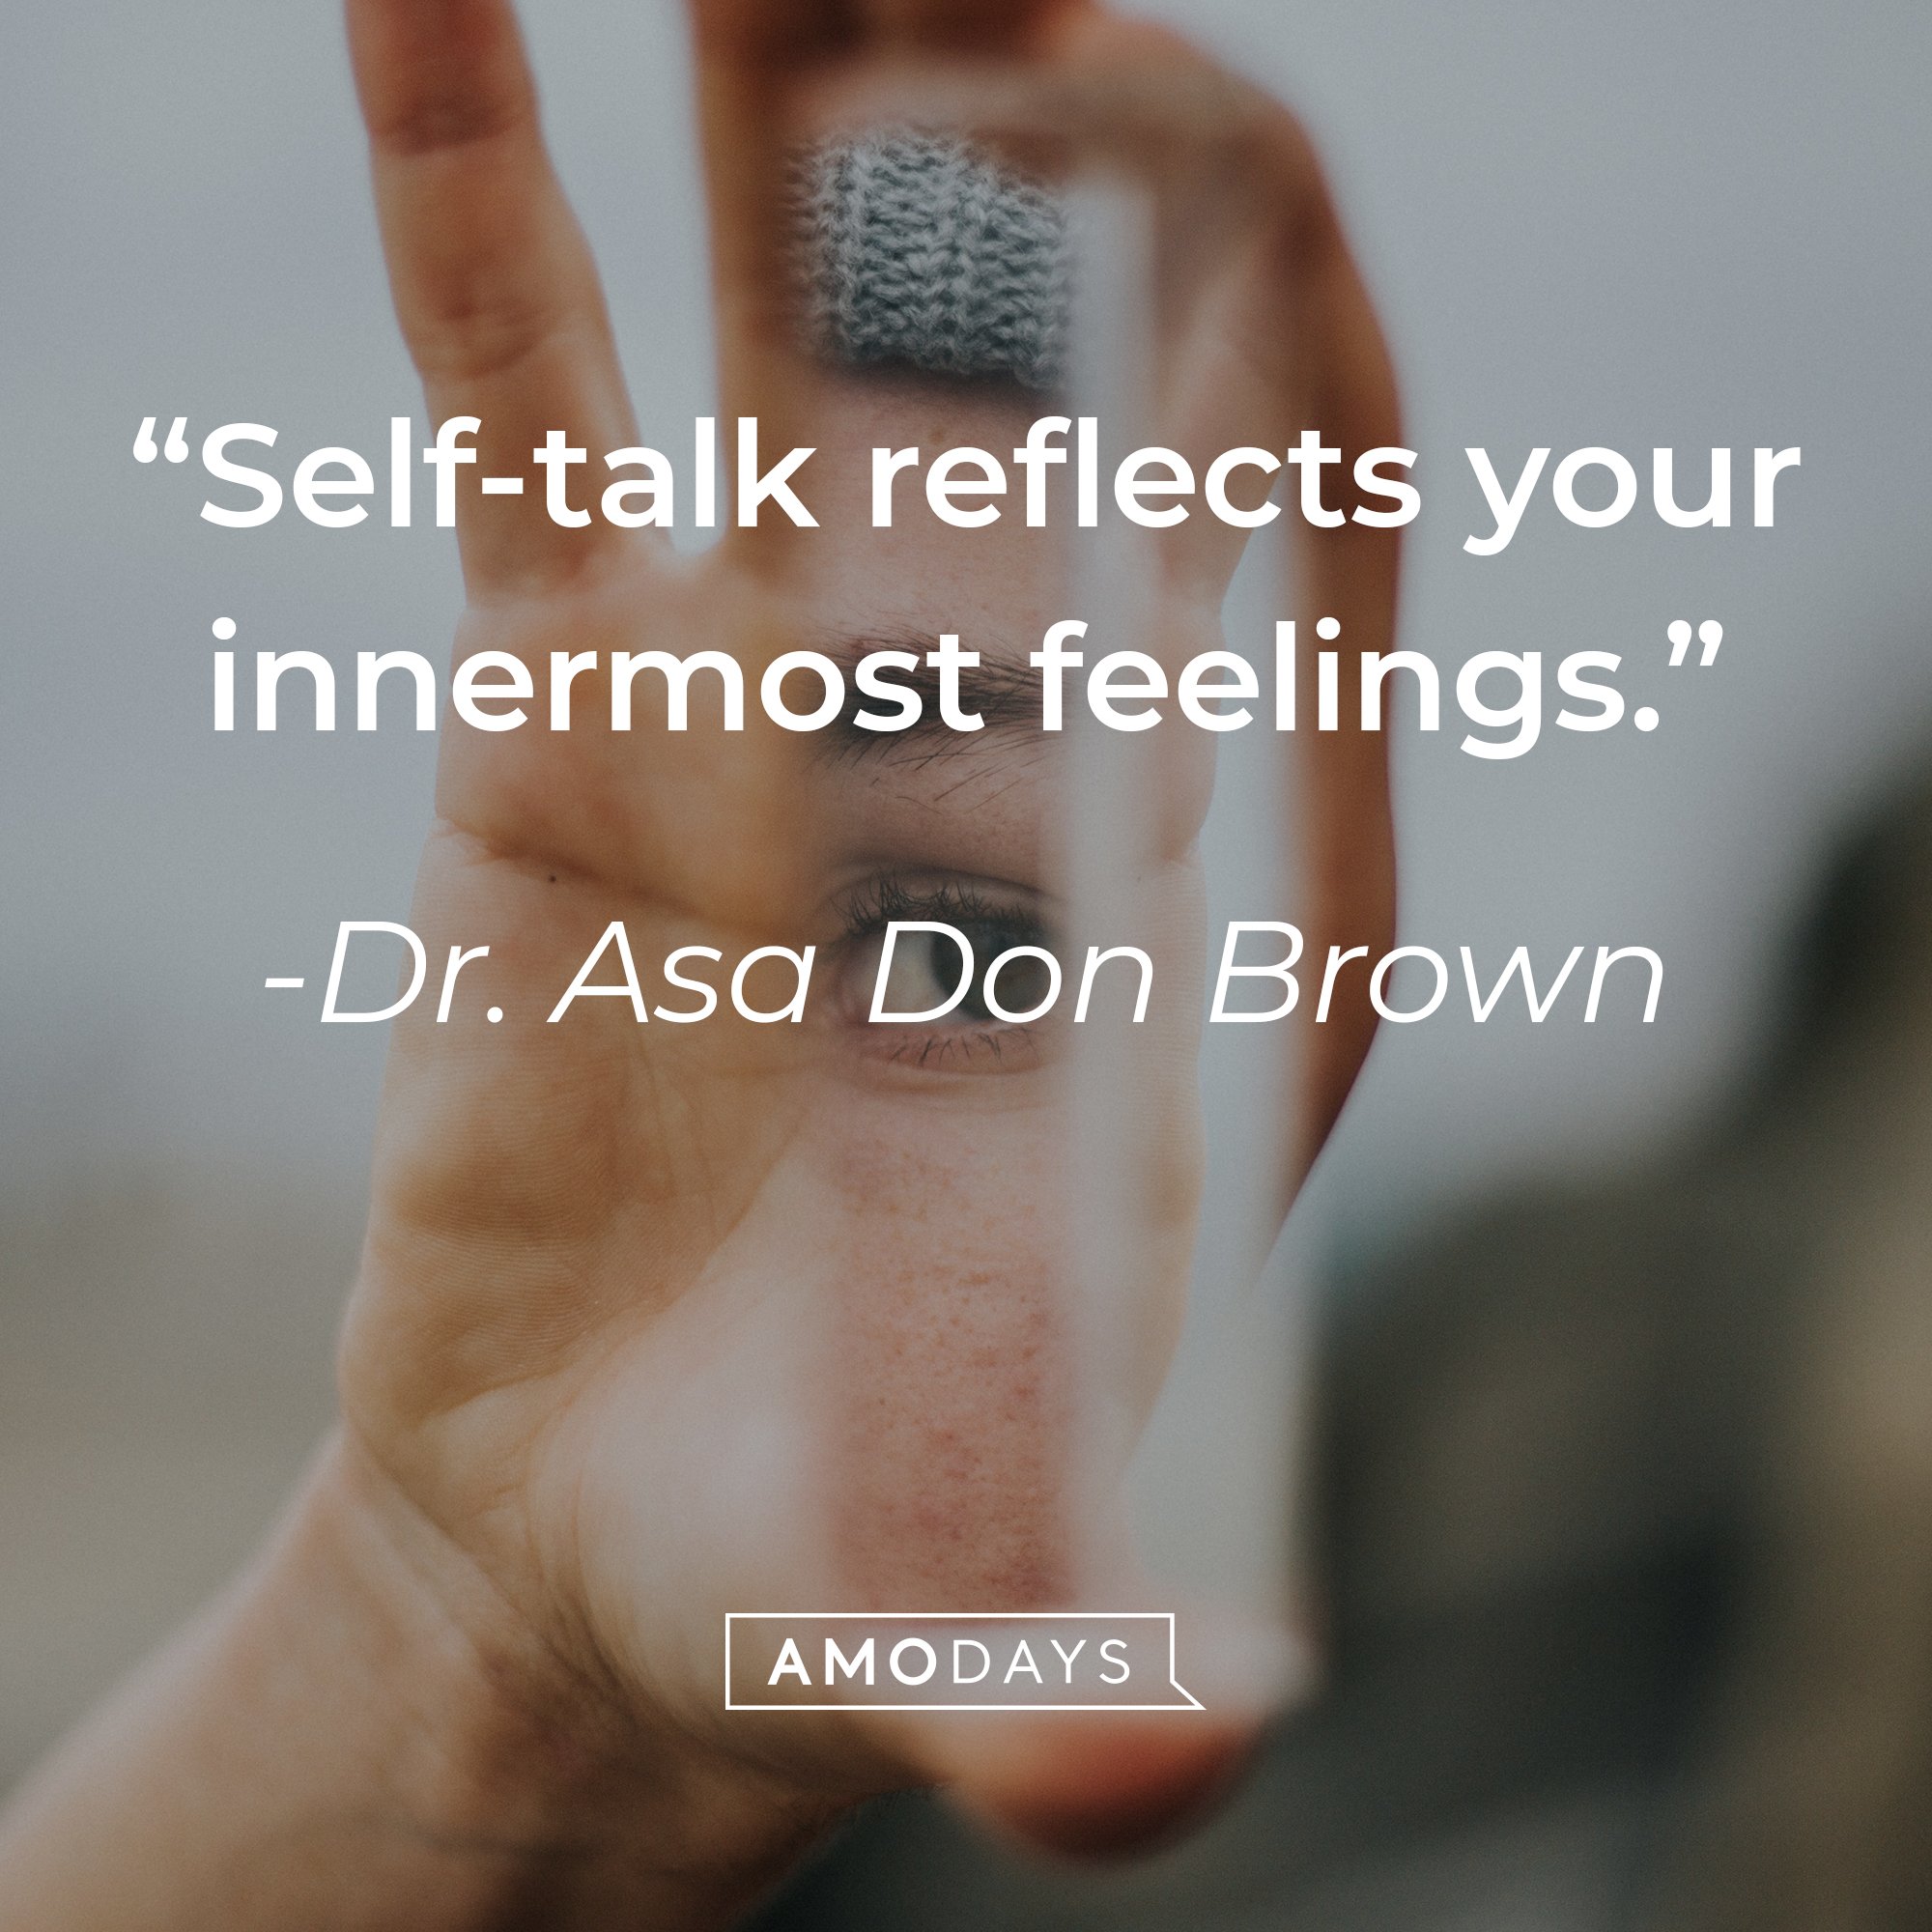 Dr. Asa Don Brown's quote: “Self-talk reflects your innermost feelings.” | Images: AmoDays